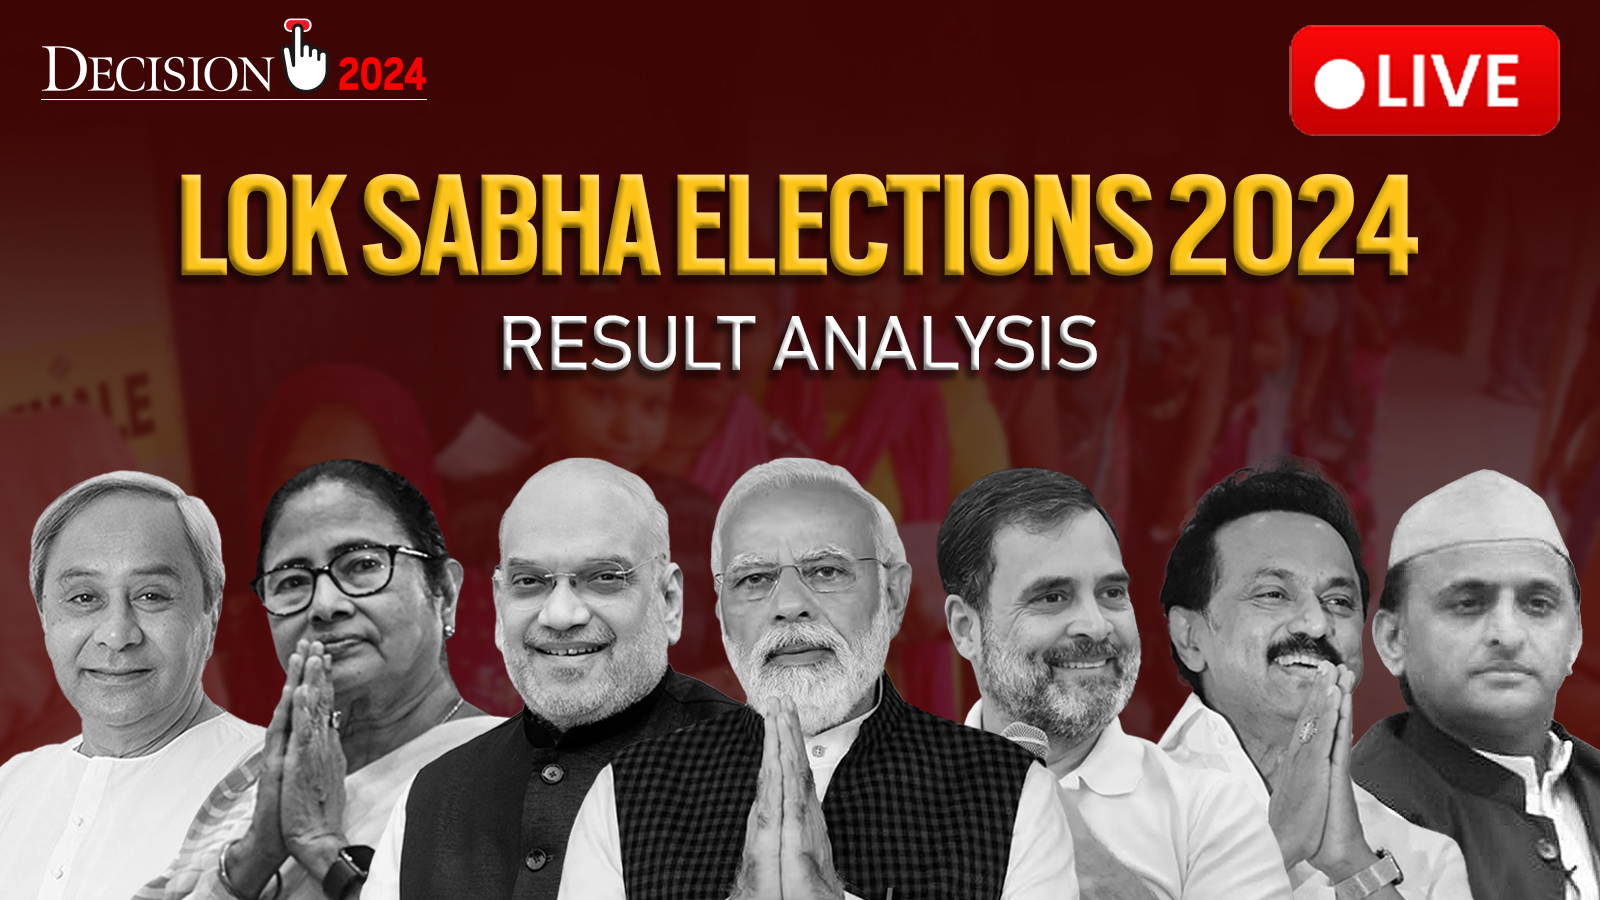 2024 Election Results Live Updates : Could Modi secure a third term? NDA is close to reaching 300 seats, INDIA advances in Lok Sabha vote counting.